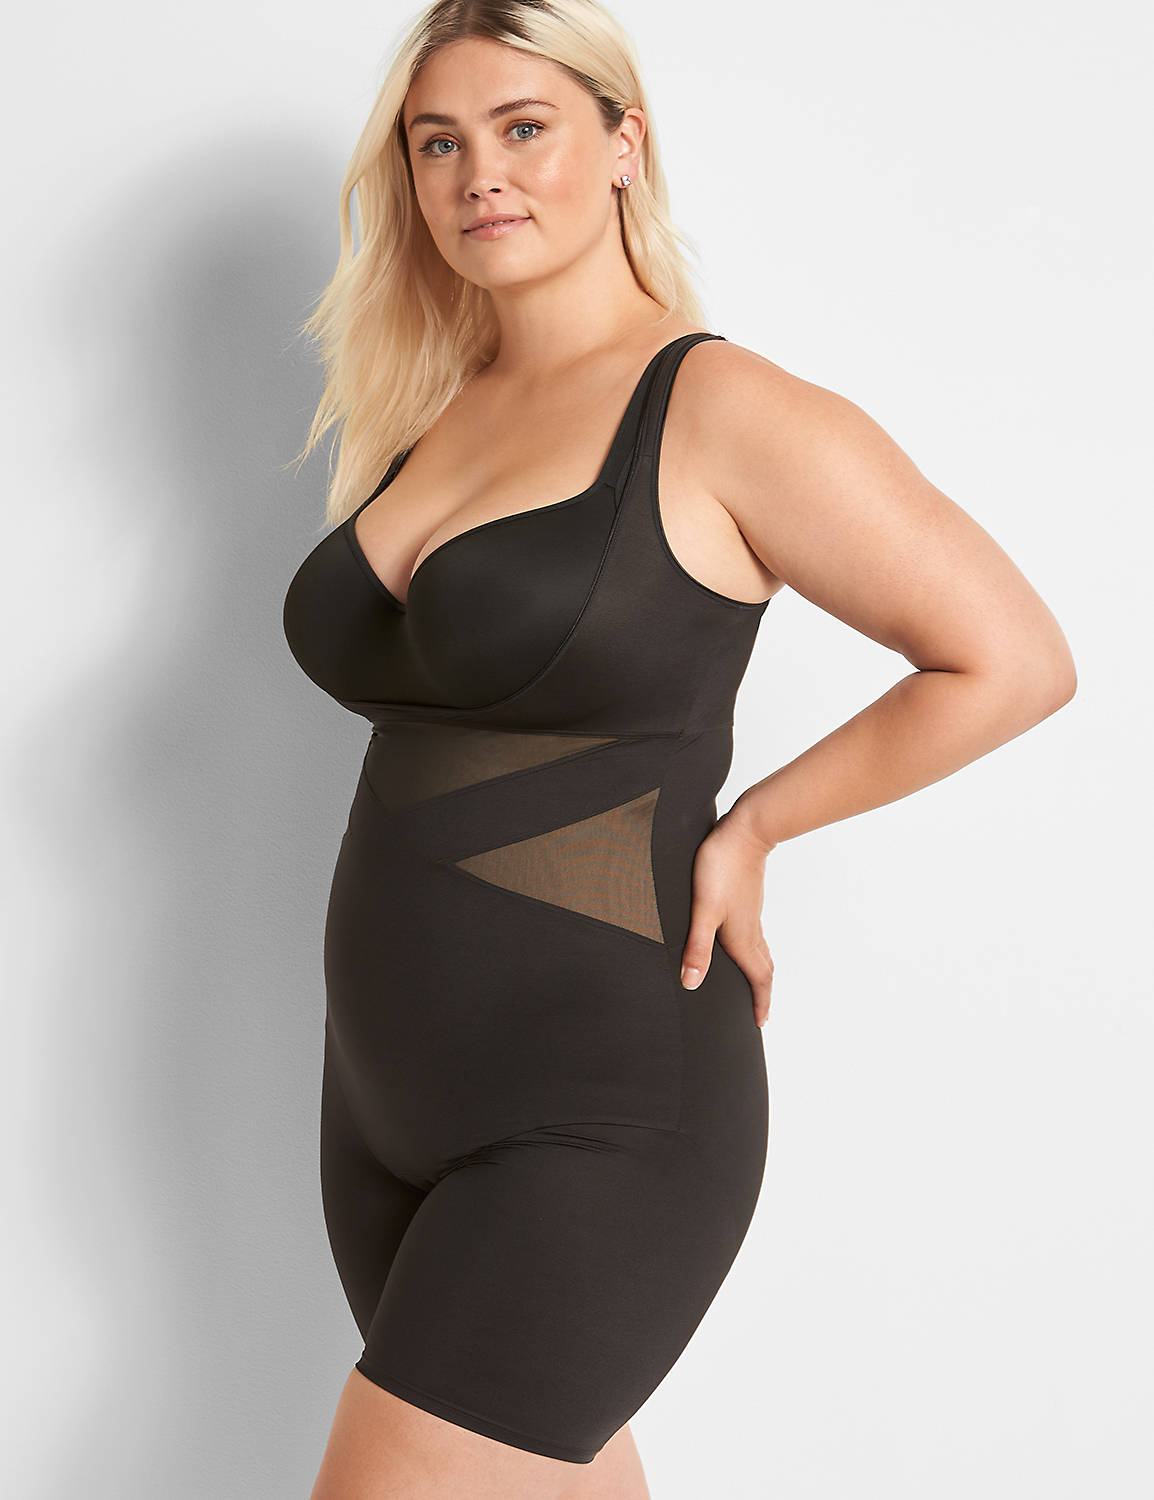 Miracles Of A Spanx Lane Bryant Spanx Review 